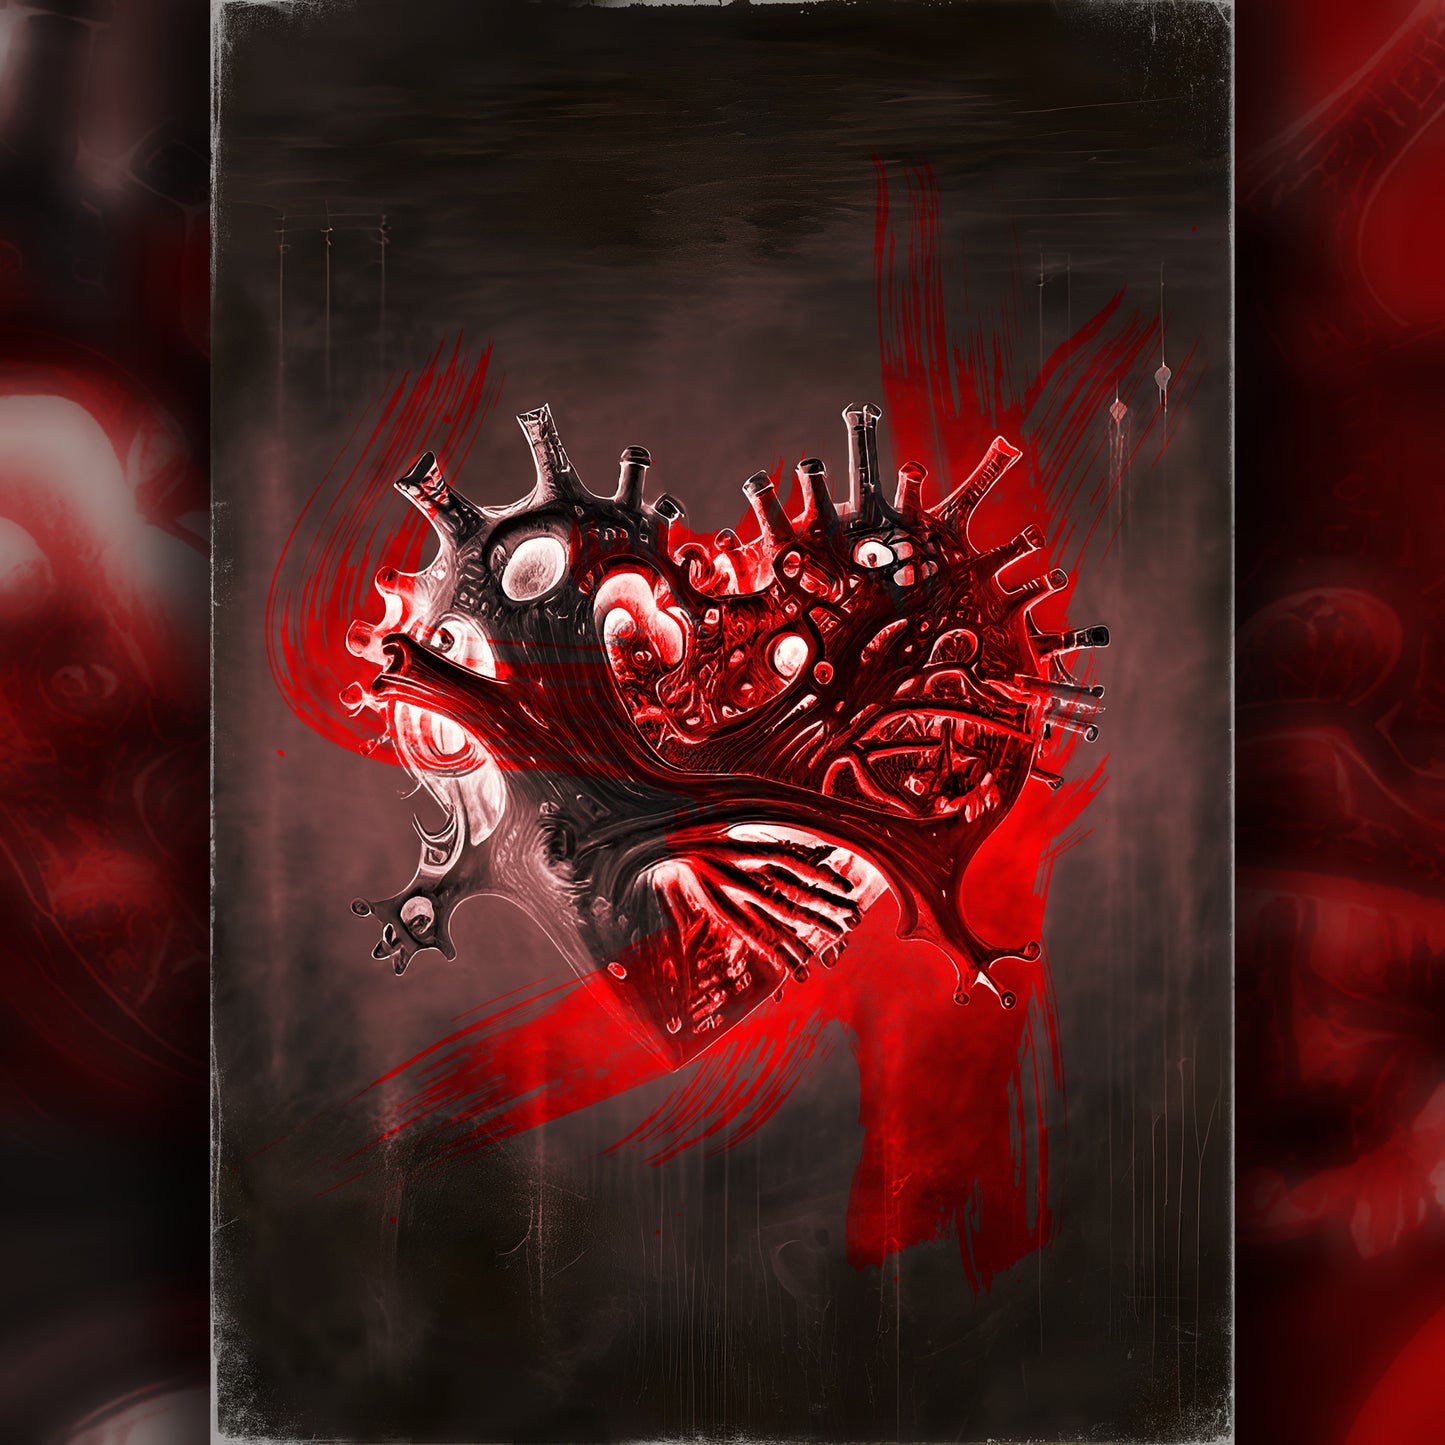 Limited edition "Bizarre Love" print features a traditional heart with veins, painted in red for a gore-horror effect.